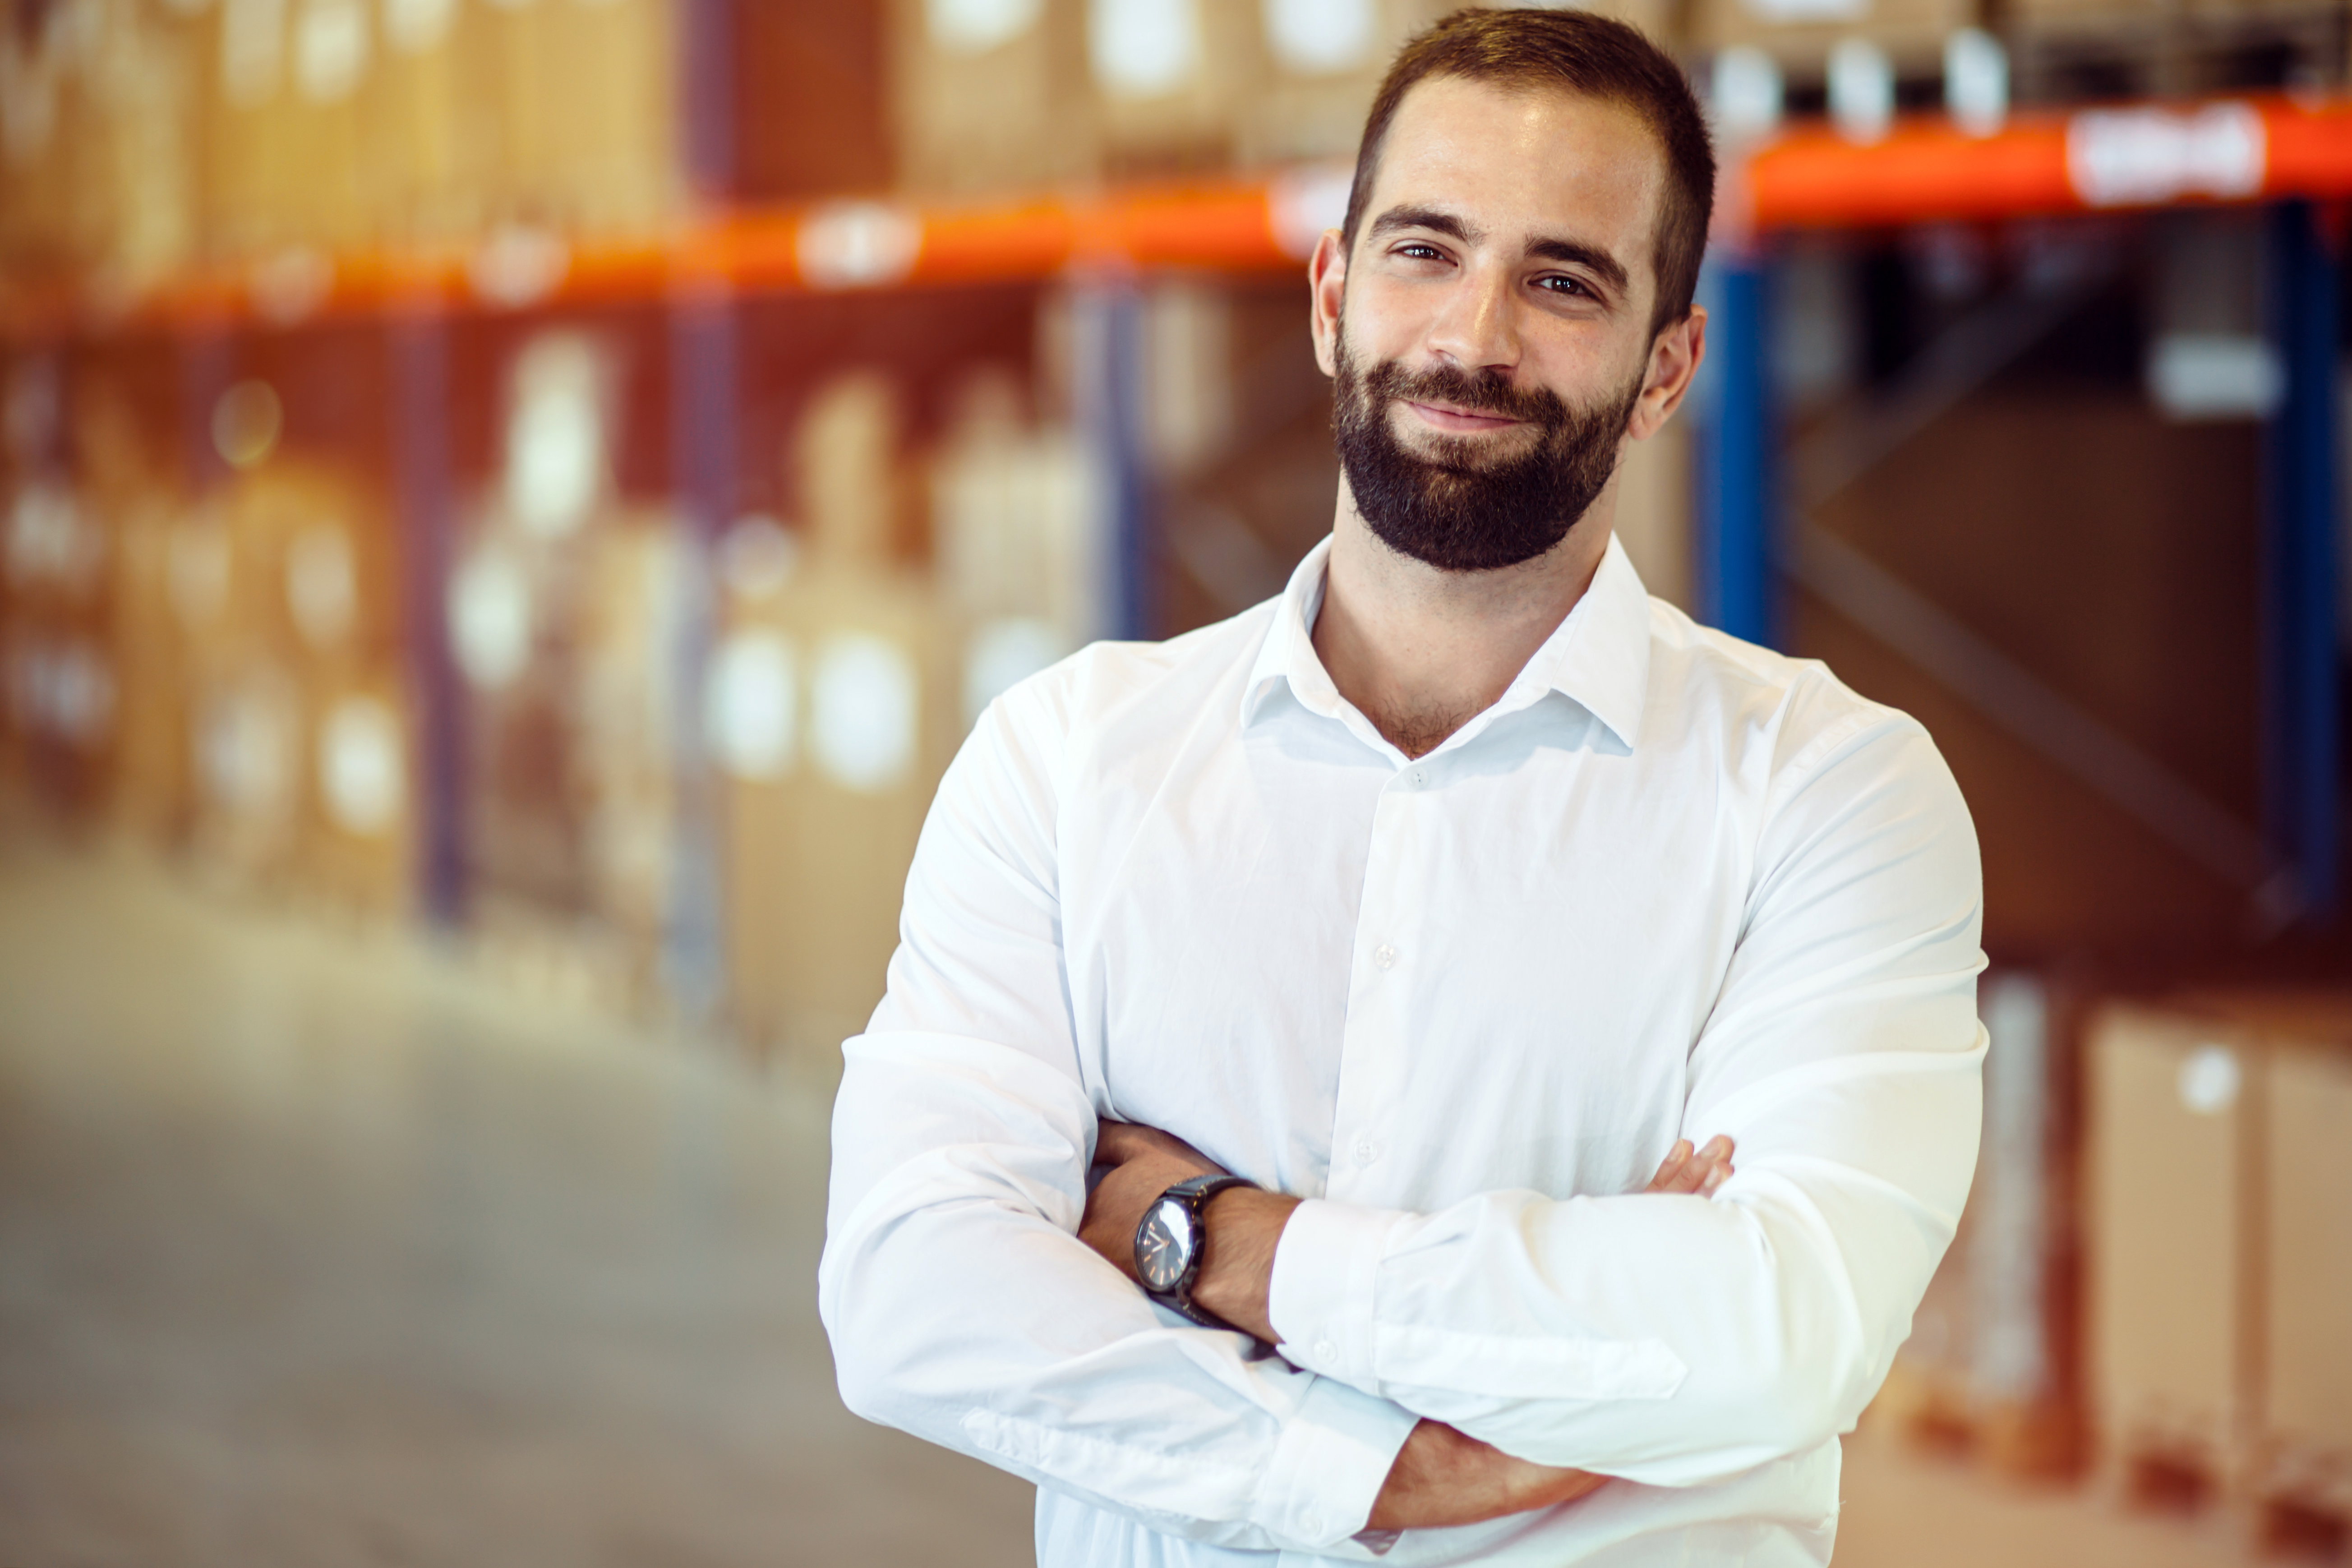 Logistics manager in warehouse standing with arms crossed